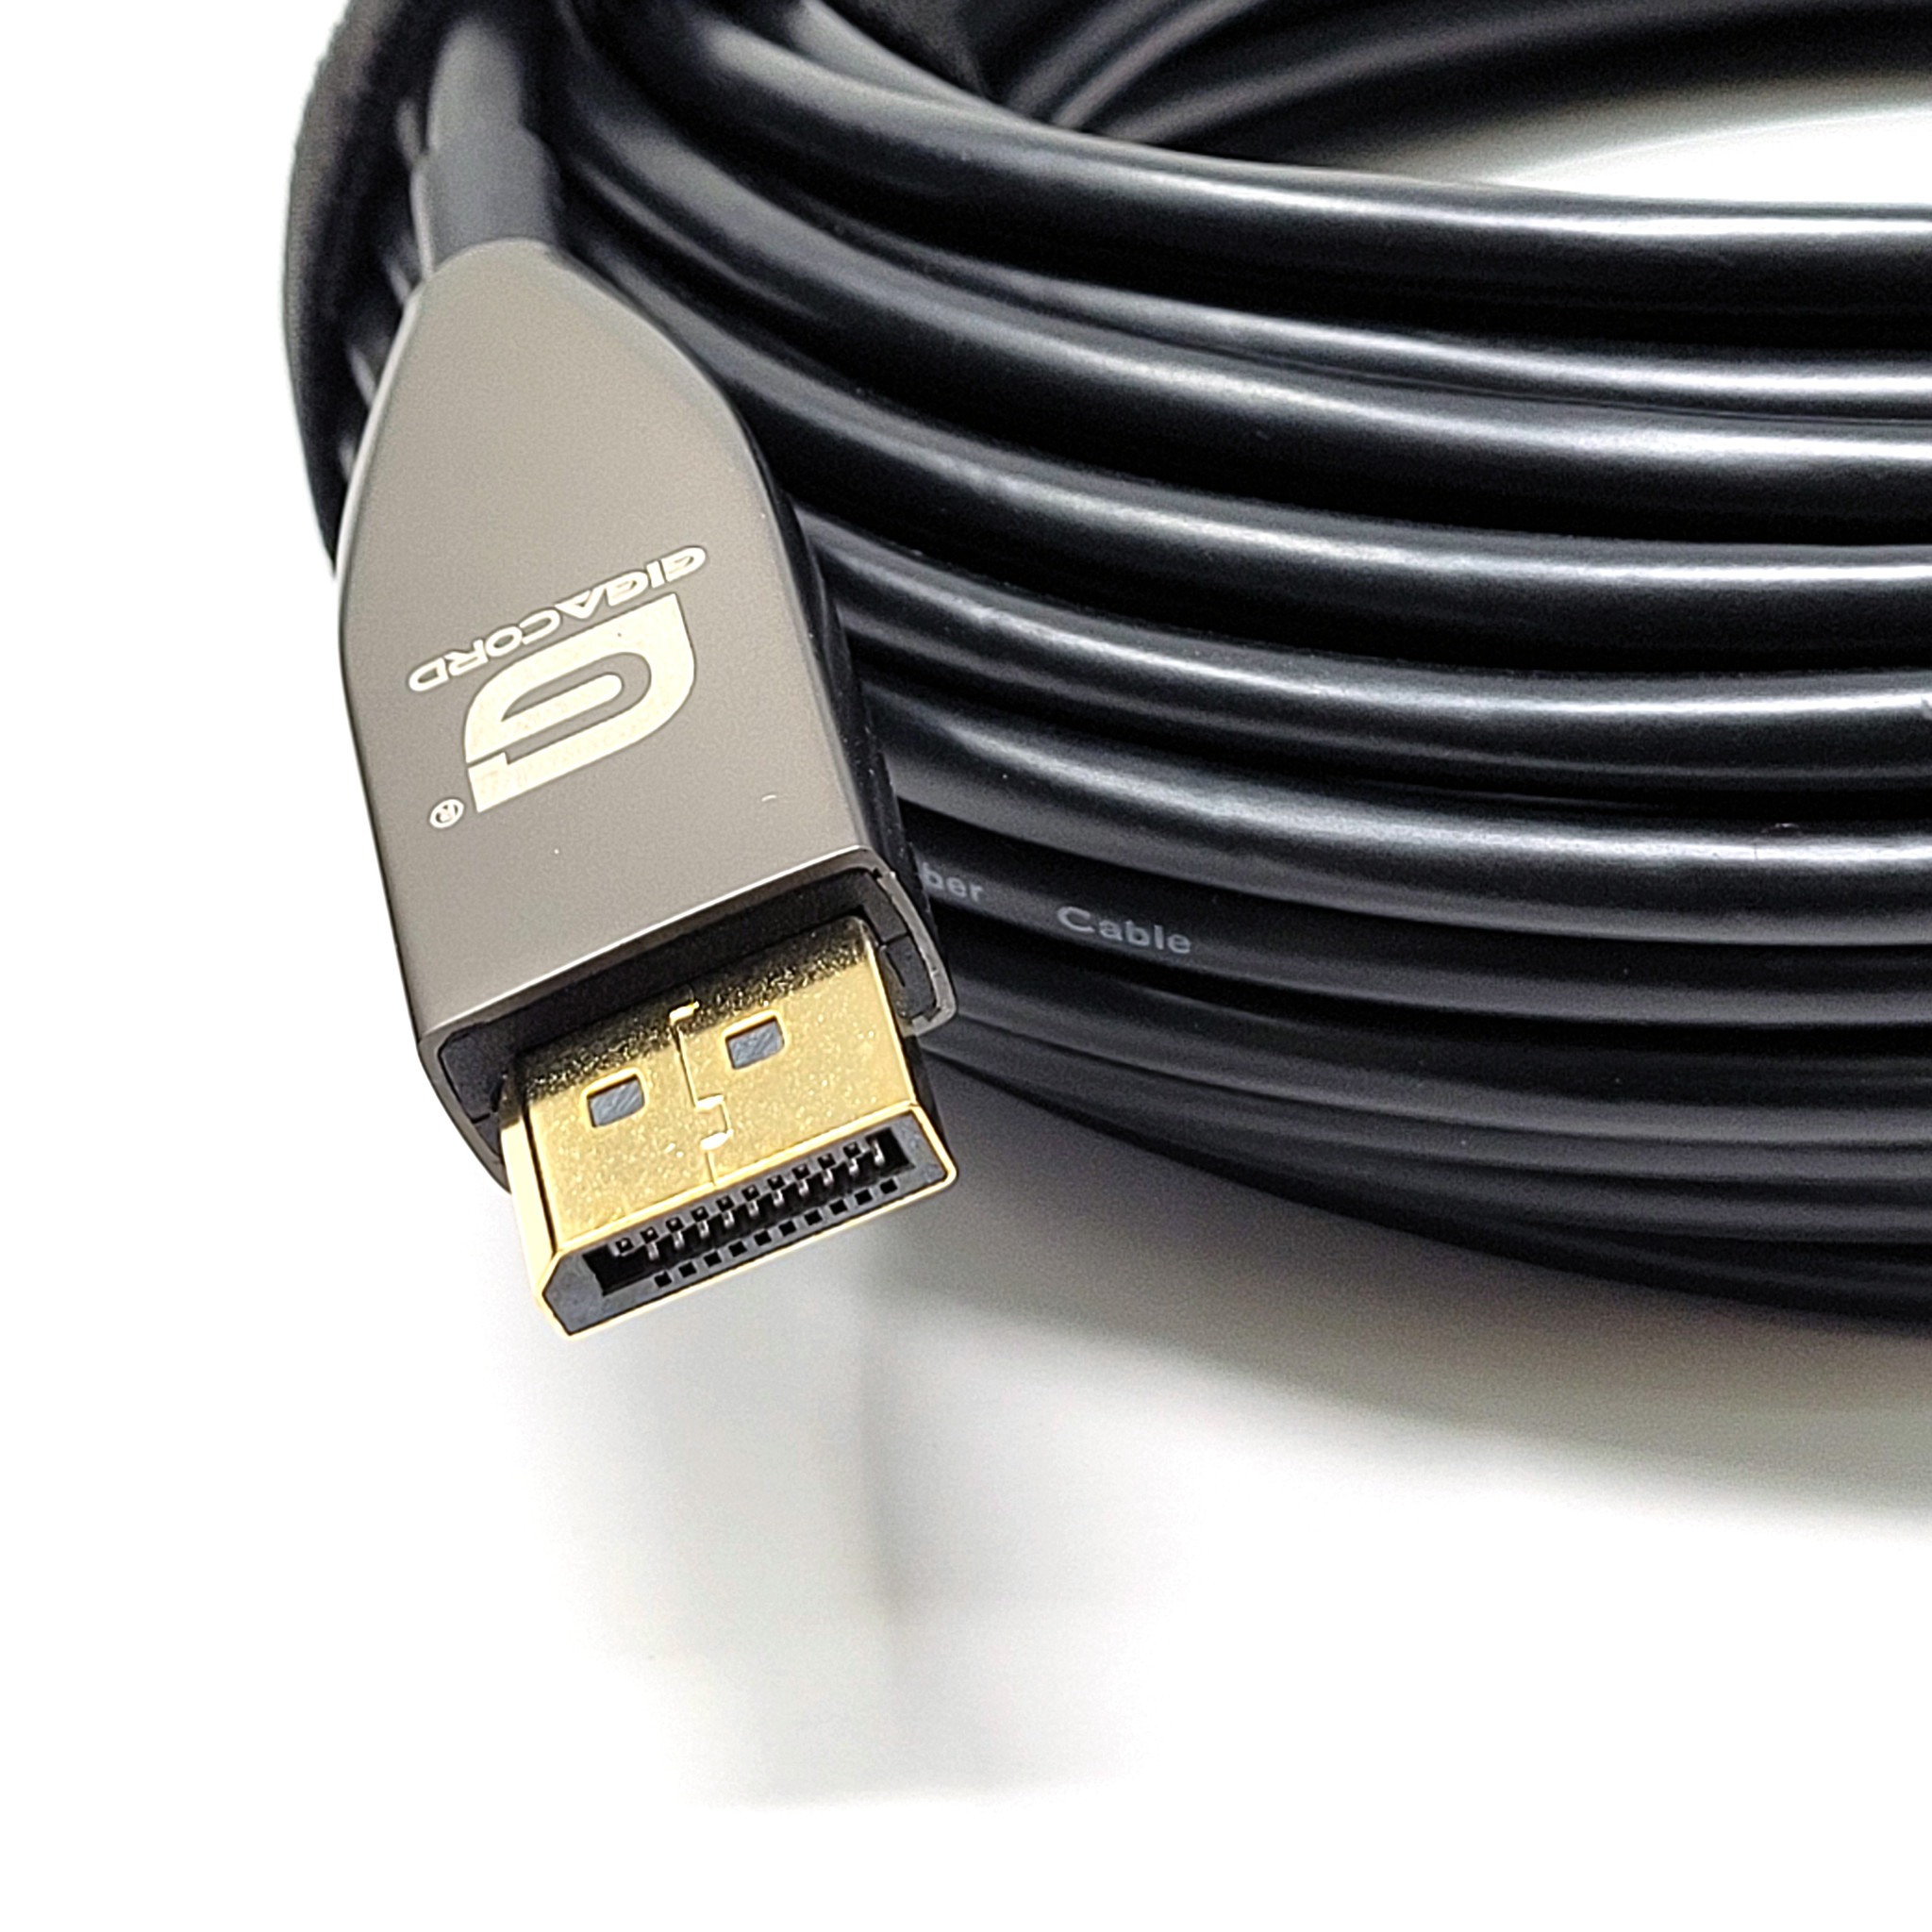 DisplayPort 1.4 AOC cable, 8K@60Hz, RGB 4:4:4, 32.4Gbps, Slim, Flexible  4-Core optical Fiber with no signal loss (10m/32ft. - 50m/164ft.) - NWCA  Inc.